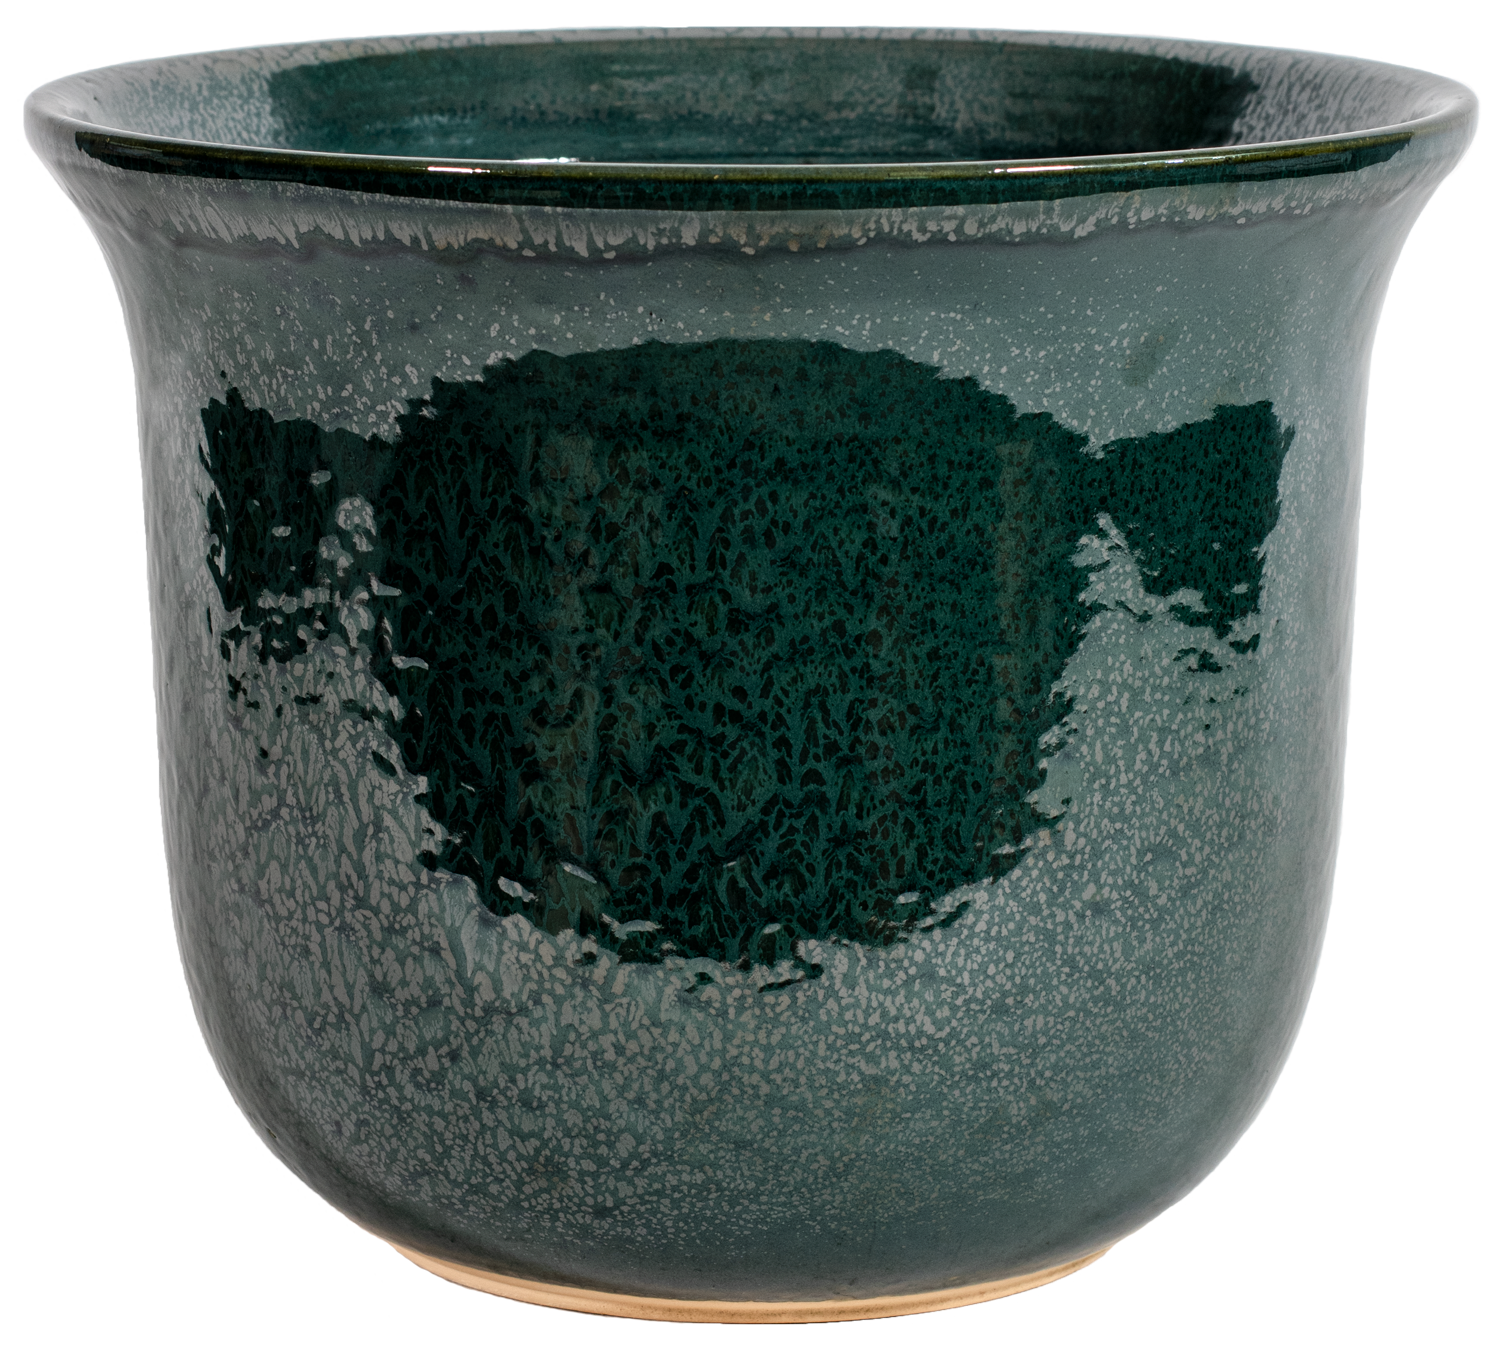 large ceramic green planter in a bell shape